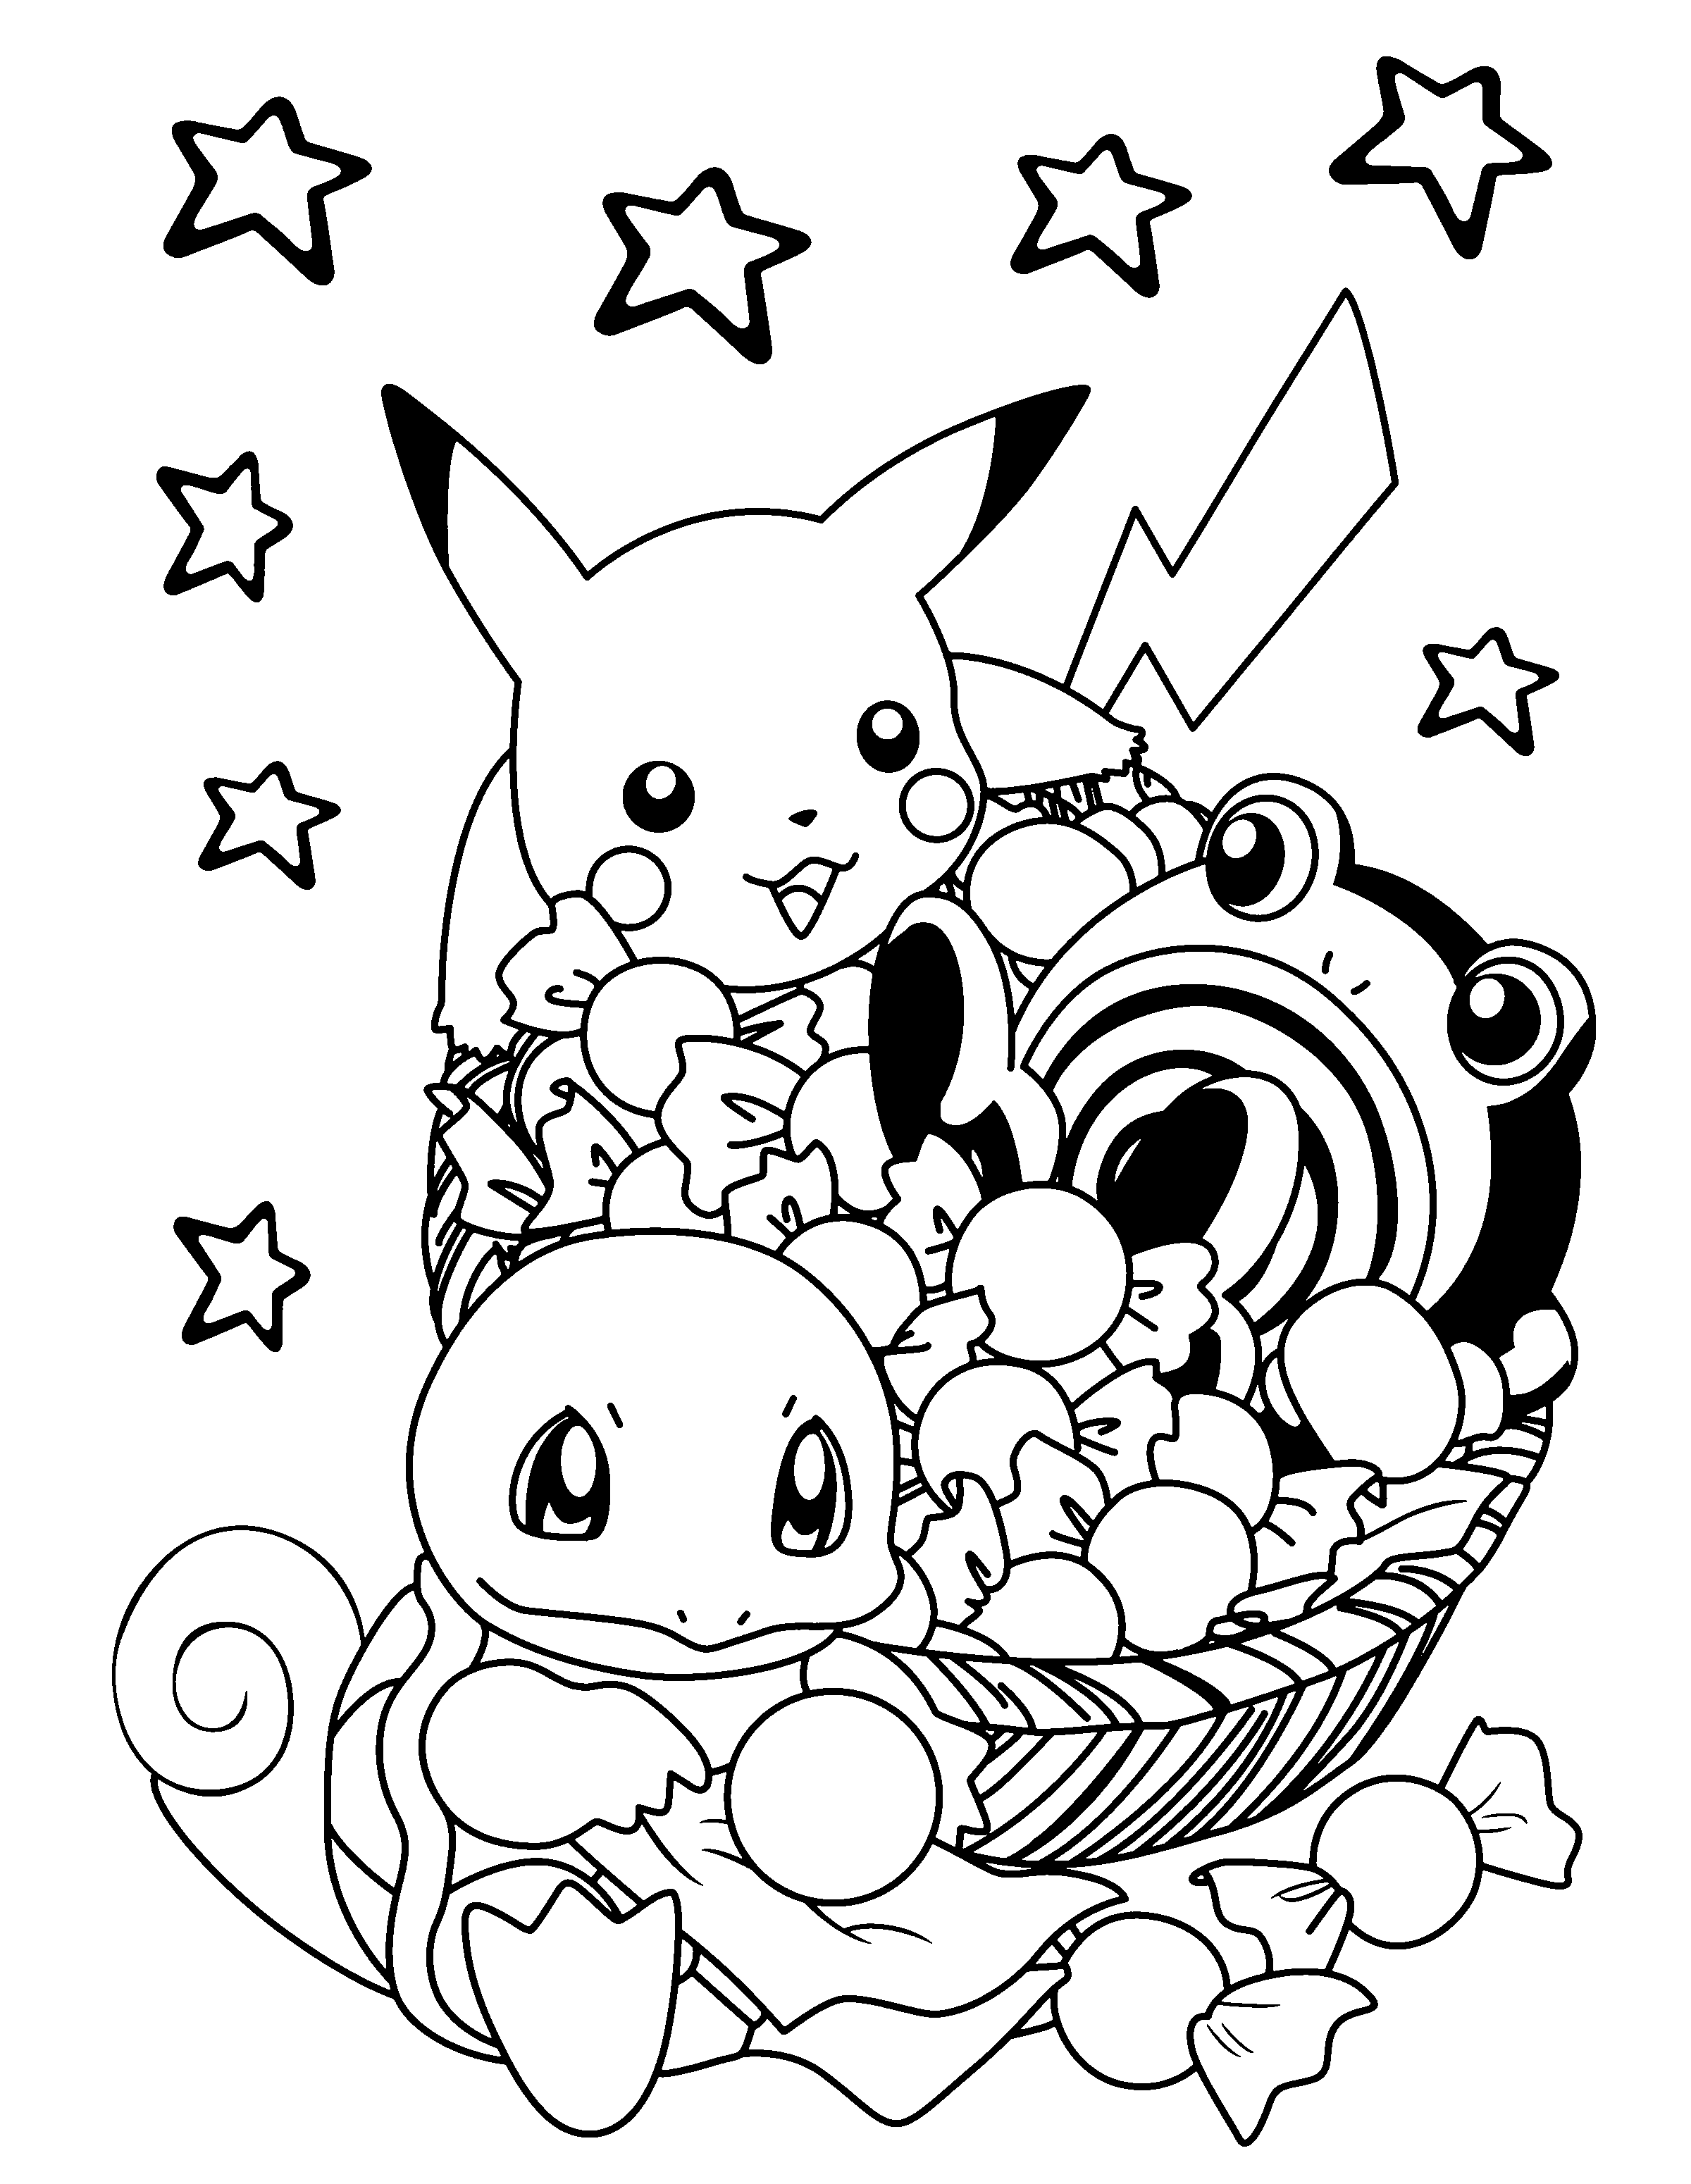 534 Unicorn Pokemon Coloring Pages for Kids